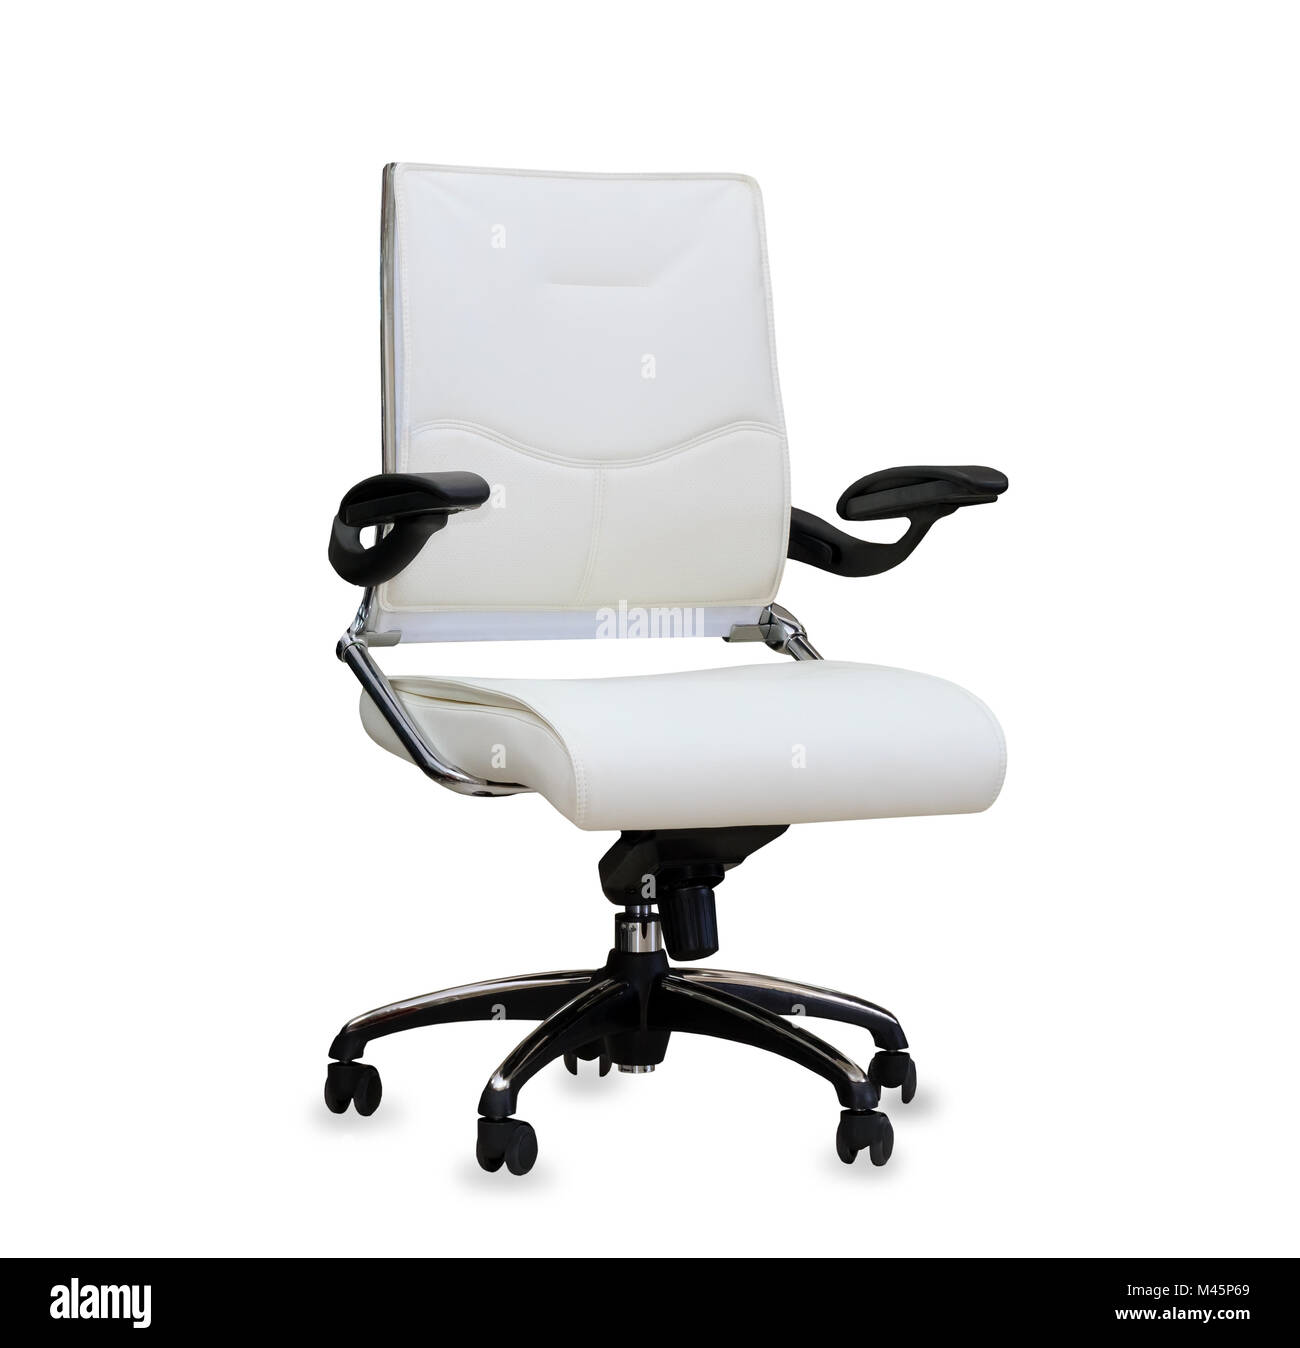 The office chair from white leather. Isolated Stock Photo